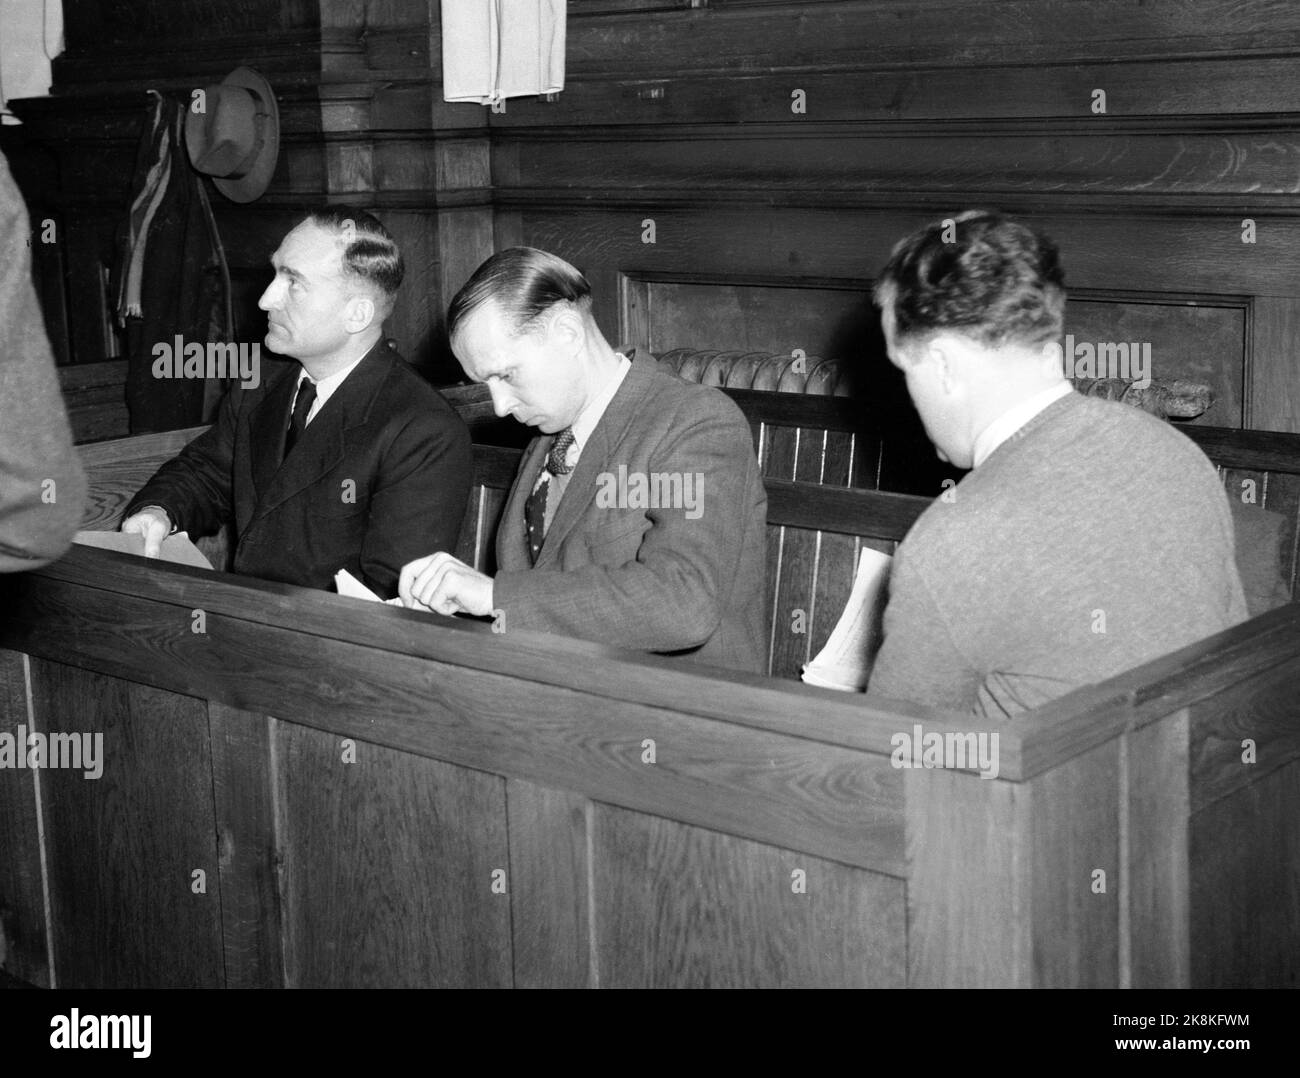 Oslo, 1946. Gestapists in the Court of Appeal. Richard Wilhelm Hermann Bruns is a German SS officer associated with Gestapo stationed in Norway, Rudolf Theodor Adolf Schubert was employed by Sipo in Oslo. During the time in Norway he tortured at least 11 Norwegians and killed two. and crime secretary Emil Clemens from Gestapo. They were all sentenced to death. Photo: NTB Stock Photo